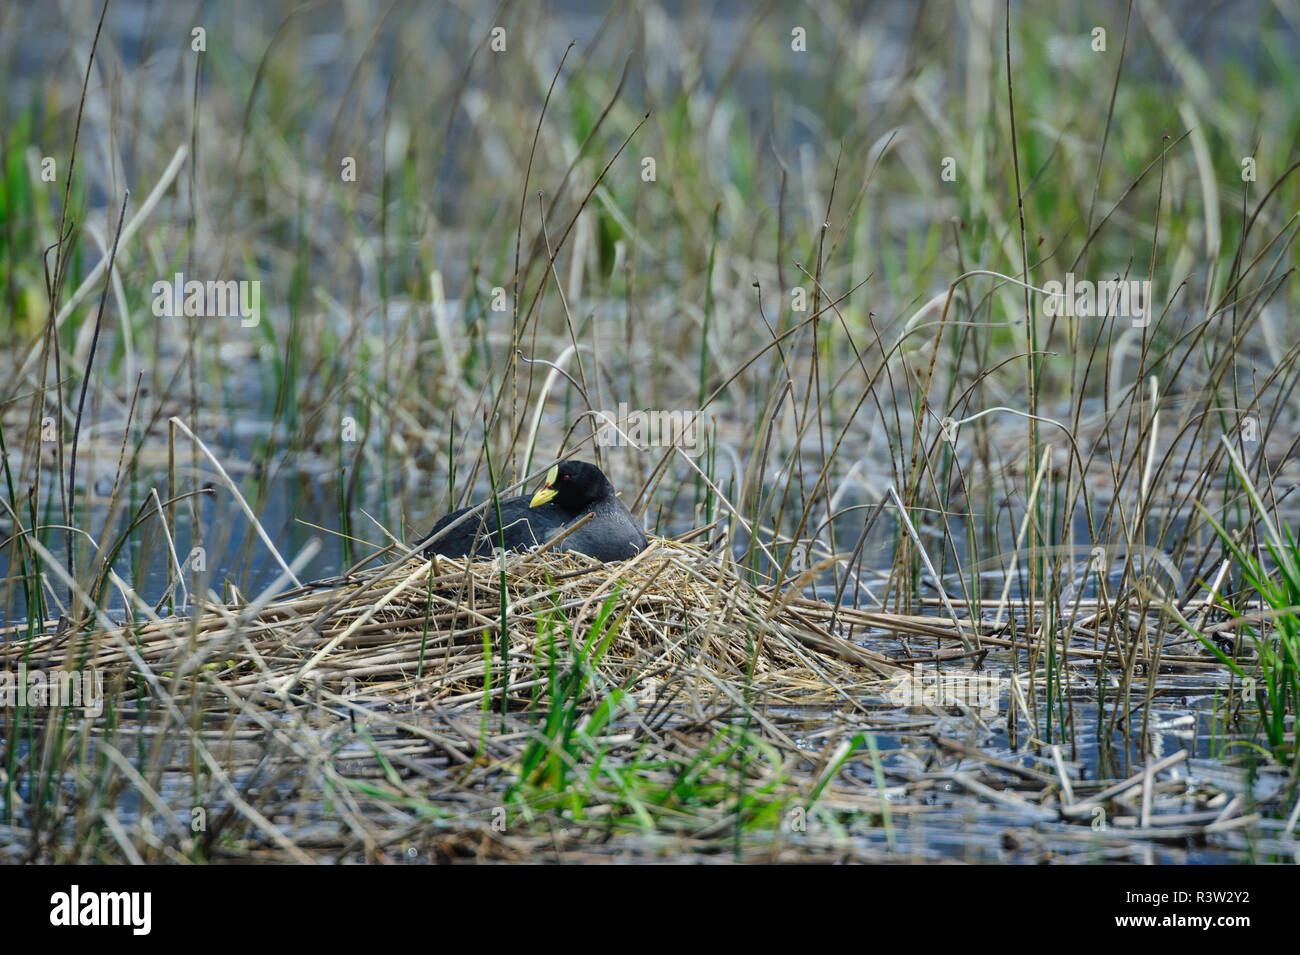 Chile, Aysen, Valle Chacabuco. Red-gartered Coot (Fulica armillata) in Patagonia Park. Stock Photo